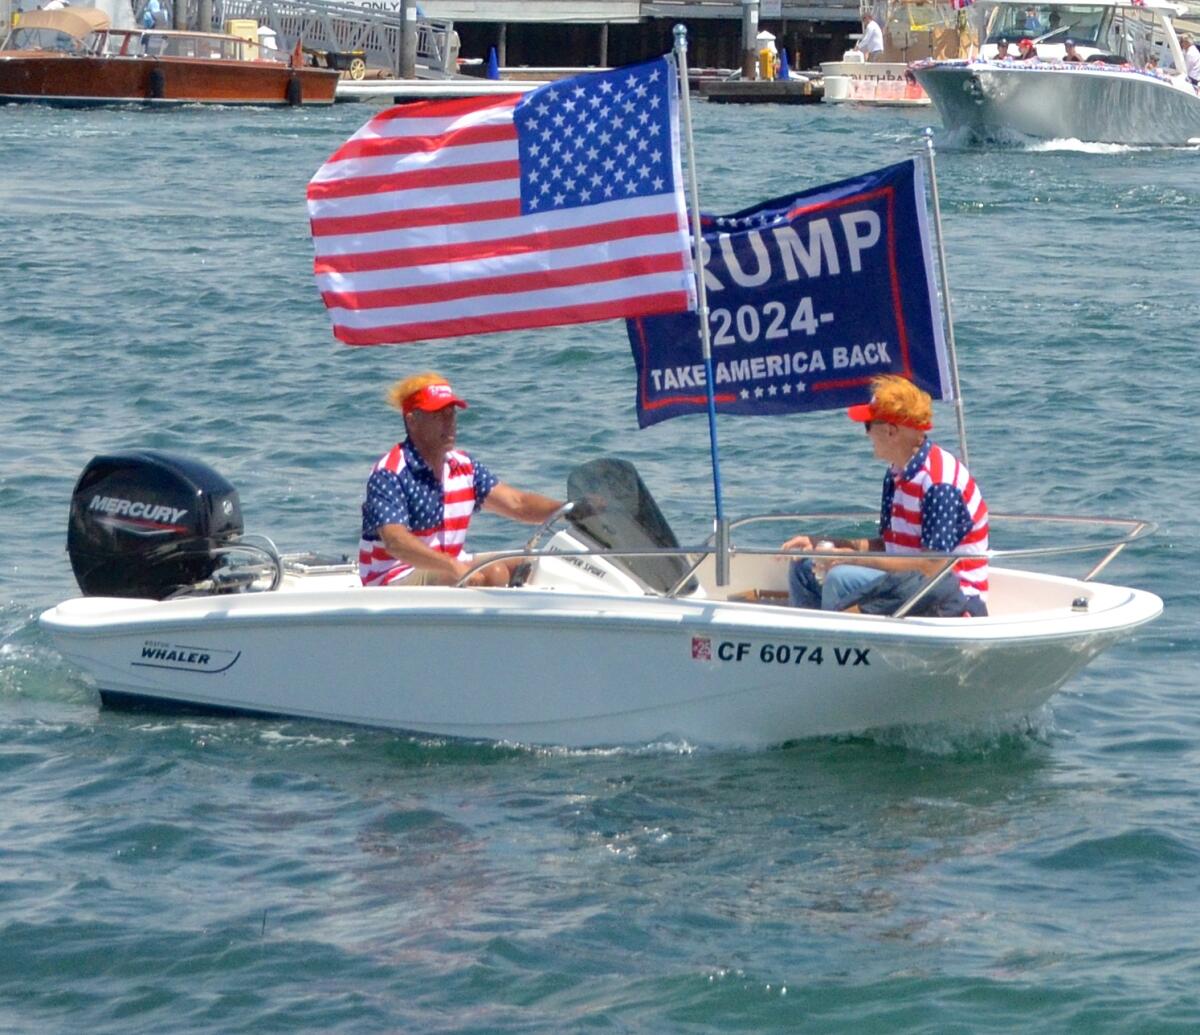 Two carrot-top sailors in a Boston Whaler cruised in the Trumptilla parade Sunday in Newport Harbor.